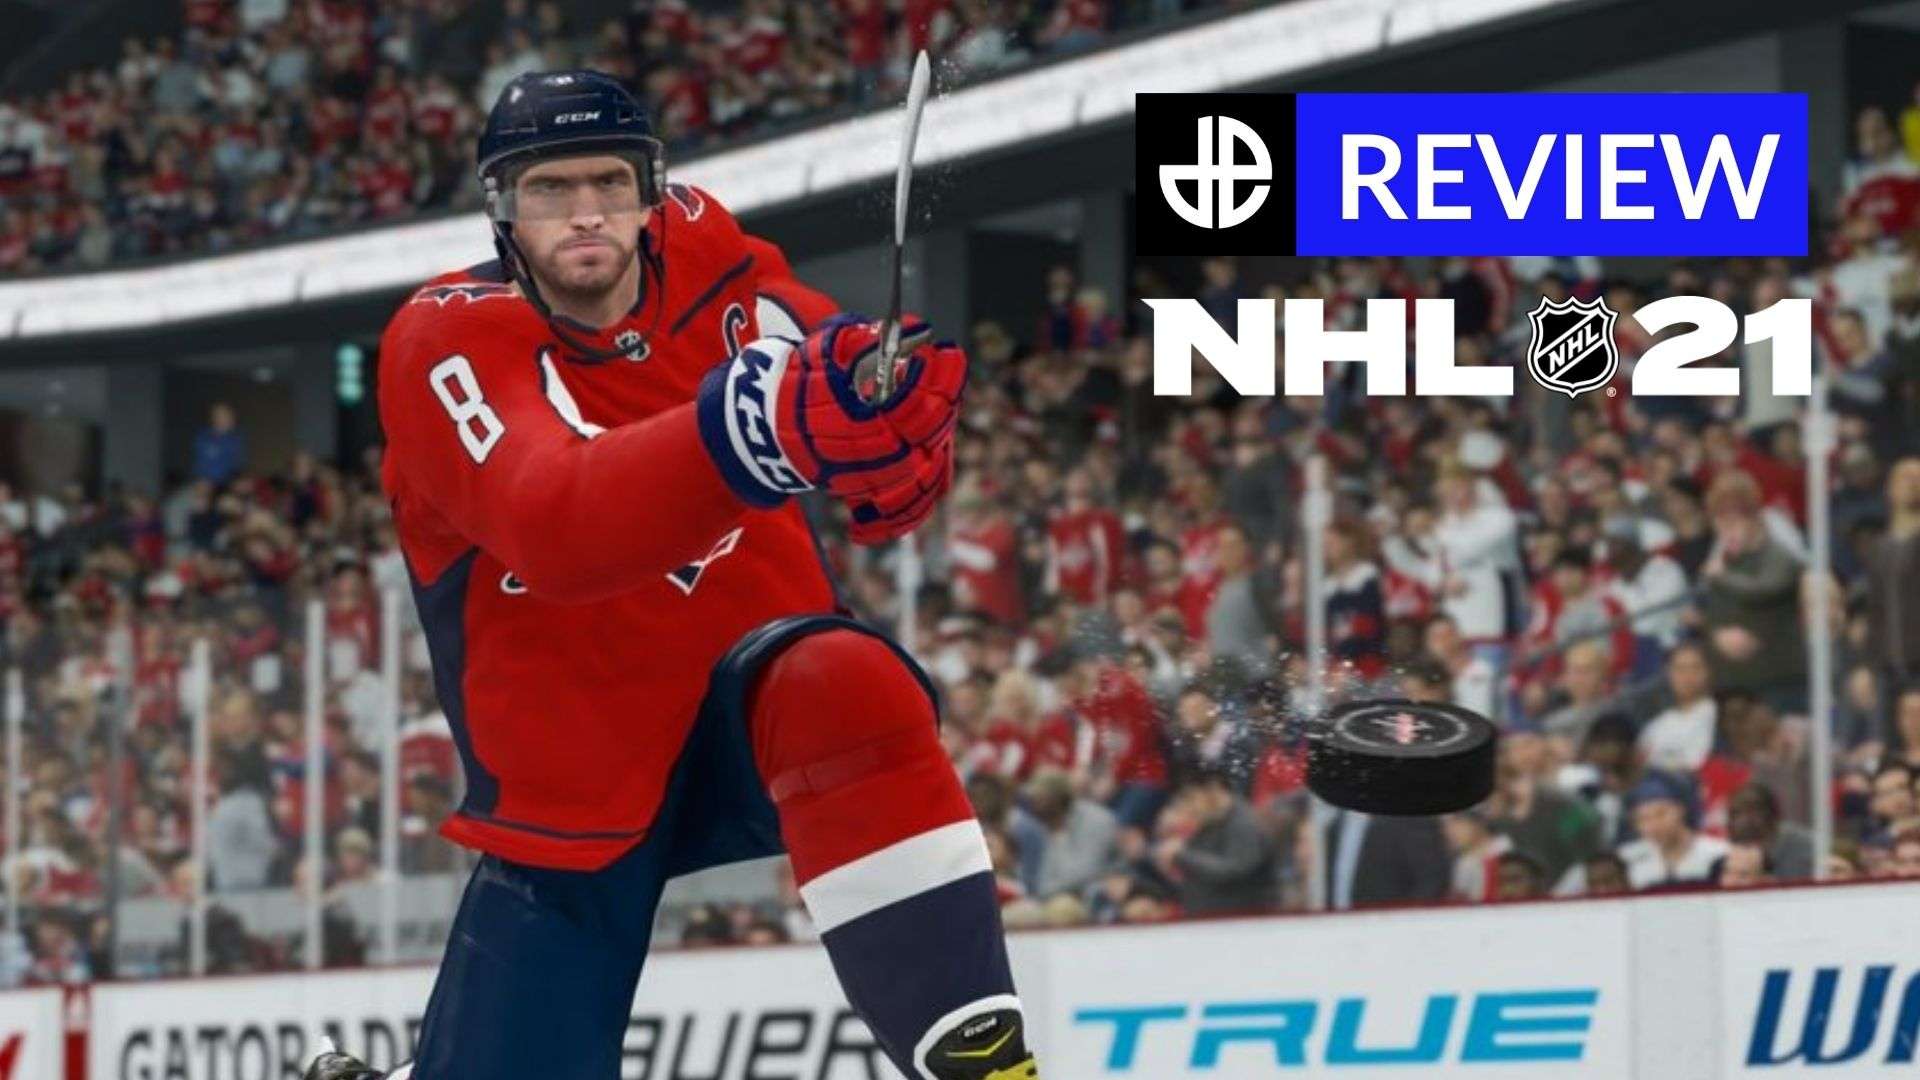 NHL 21 review